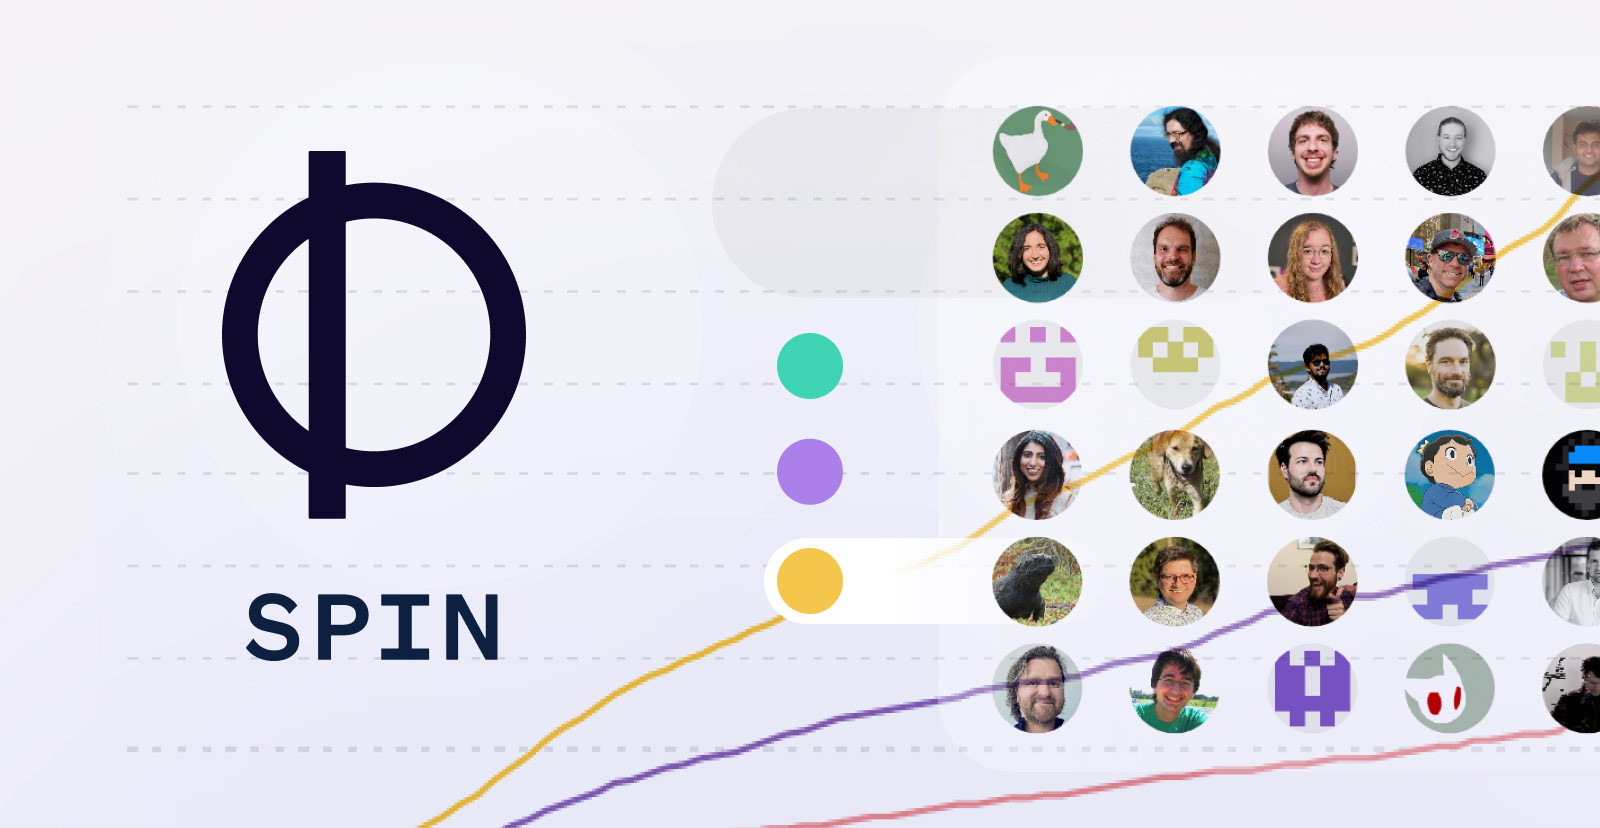 The Spin Project - A Community Snapshot